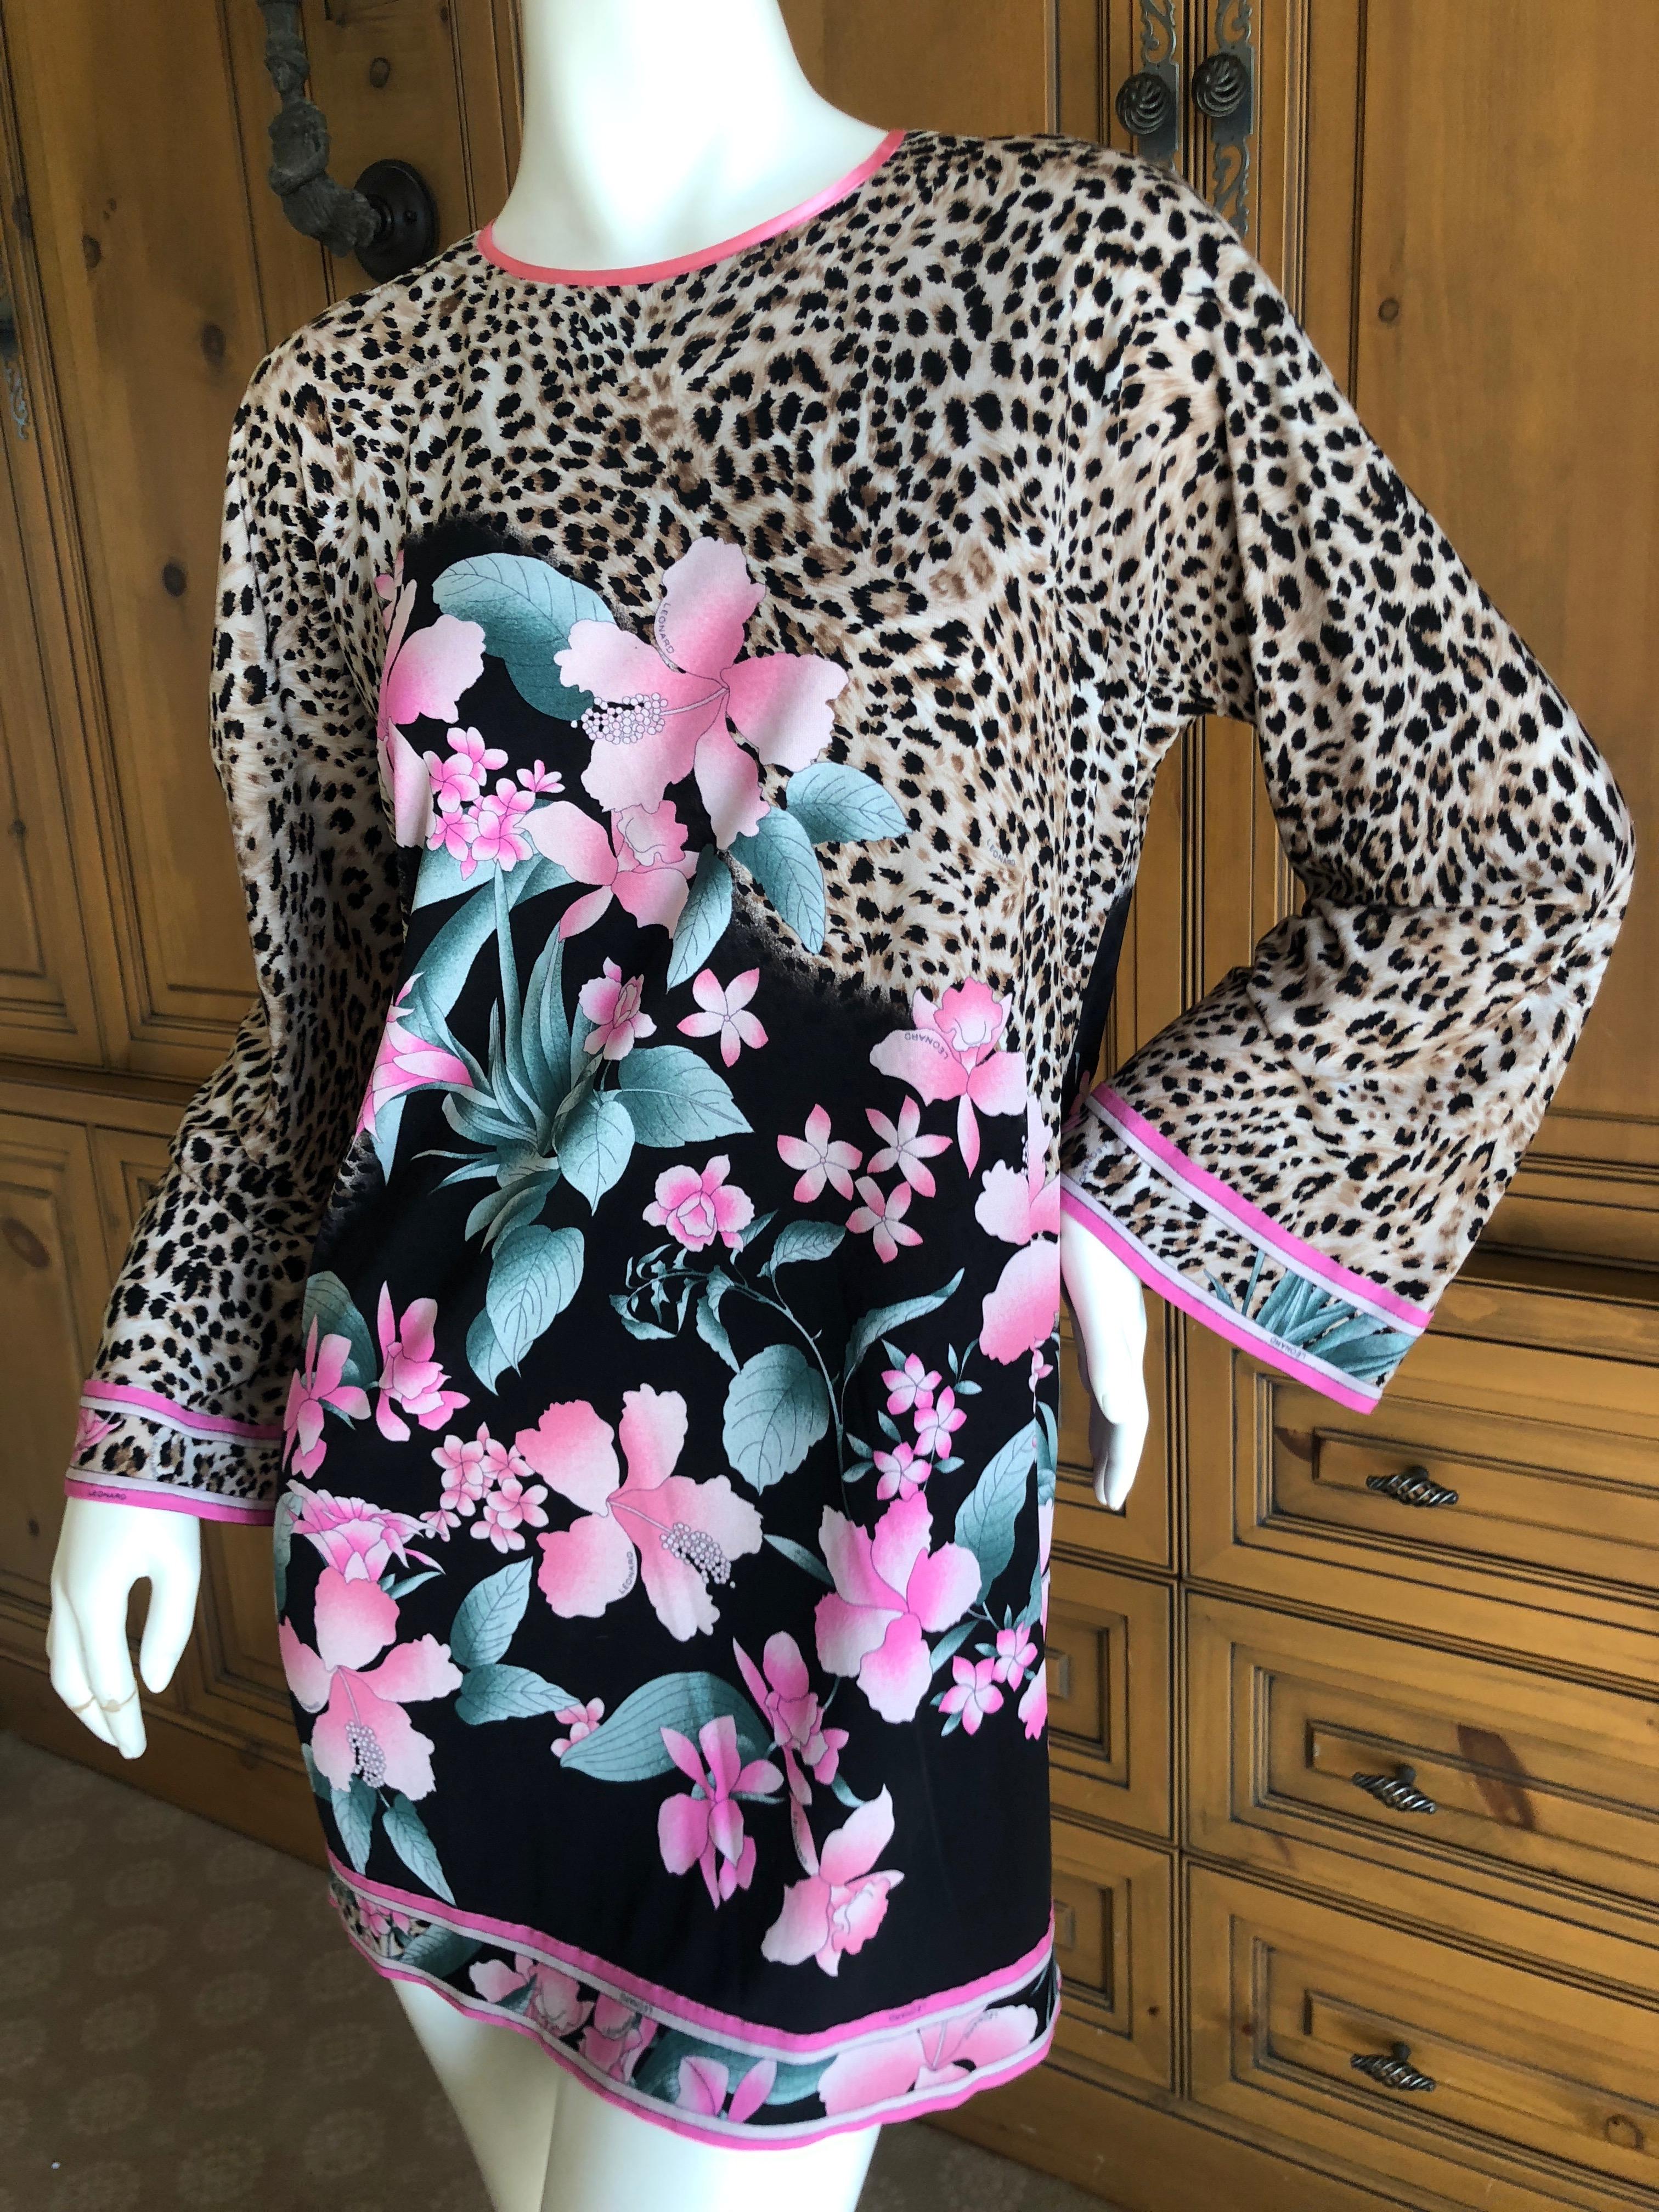 Leonard Paris 1970's Pure Silk Jersey Floral and Leopard Print Mini Dress.
Leonard , Paris was a contemporary of Pucci, using silk jersey printed in their signature florals, Leonard was as expensive, if not more, than Pucci.
Size 38 but runs